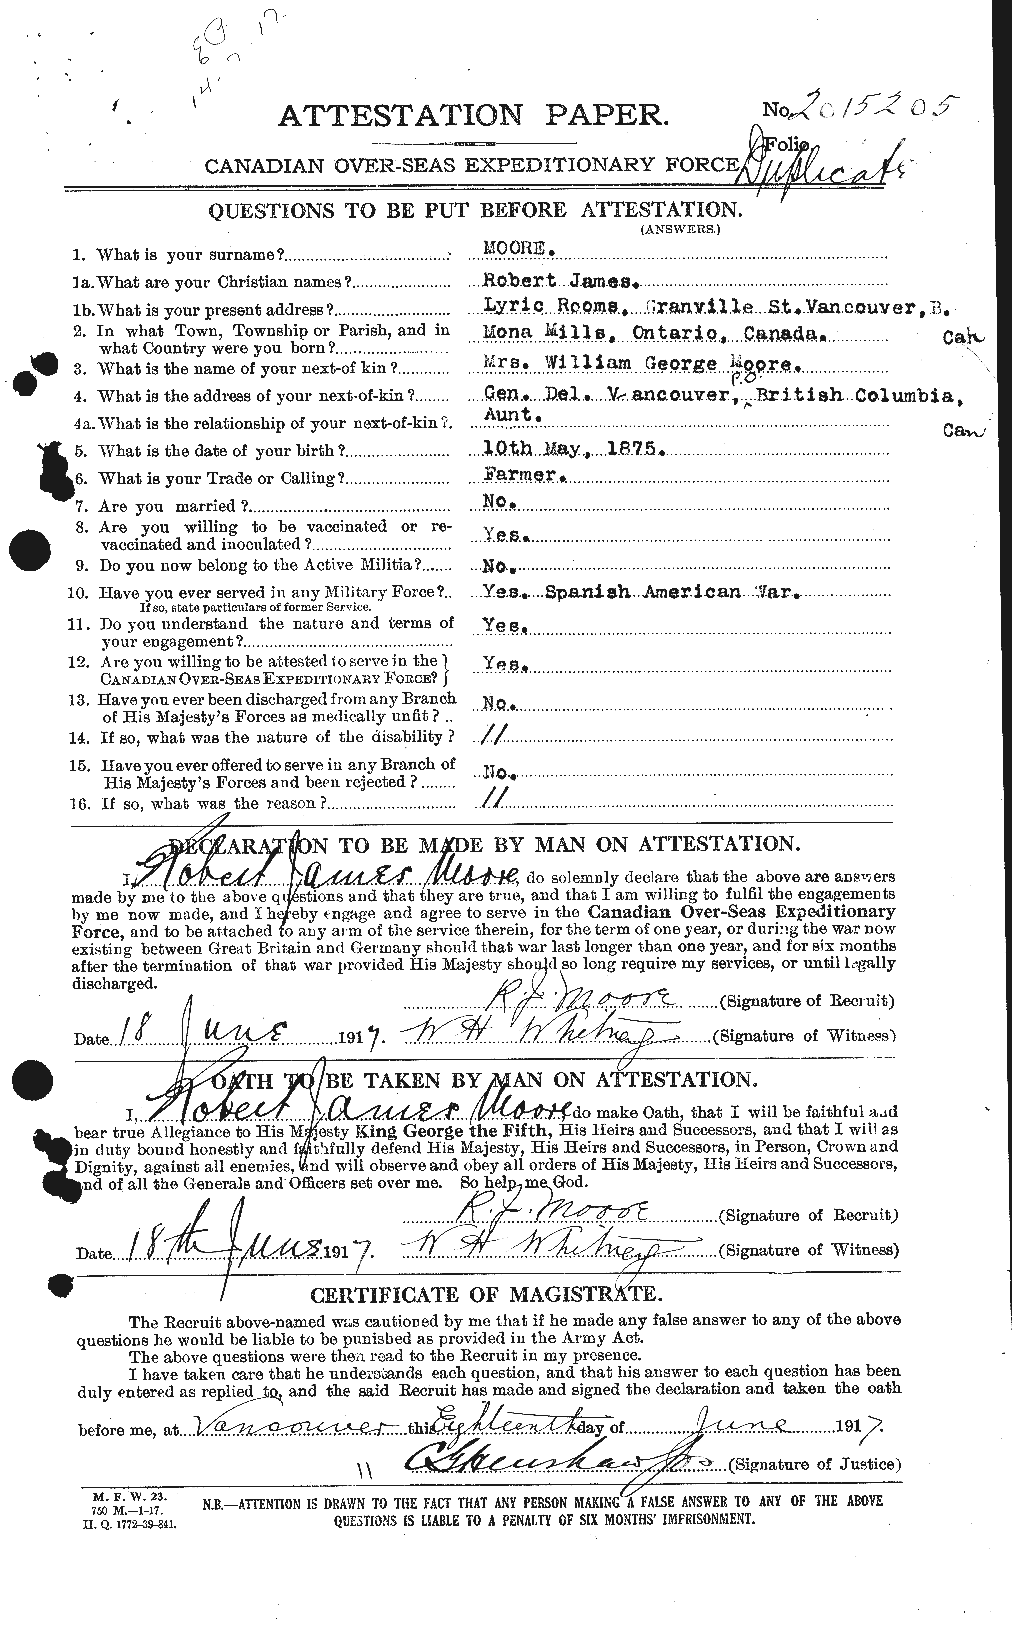 Personnel Records of the First World War - CEF 503576a